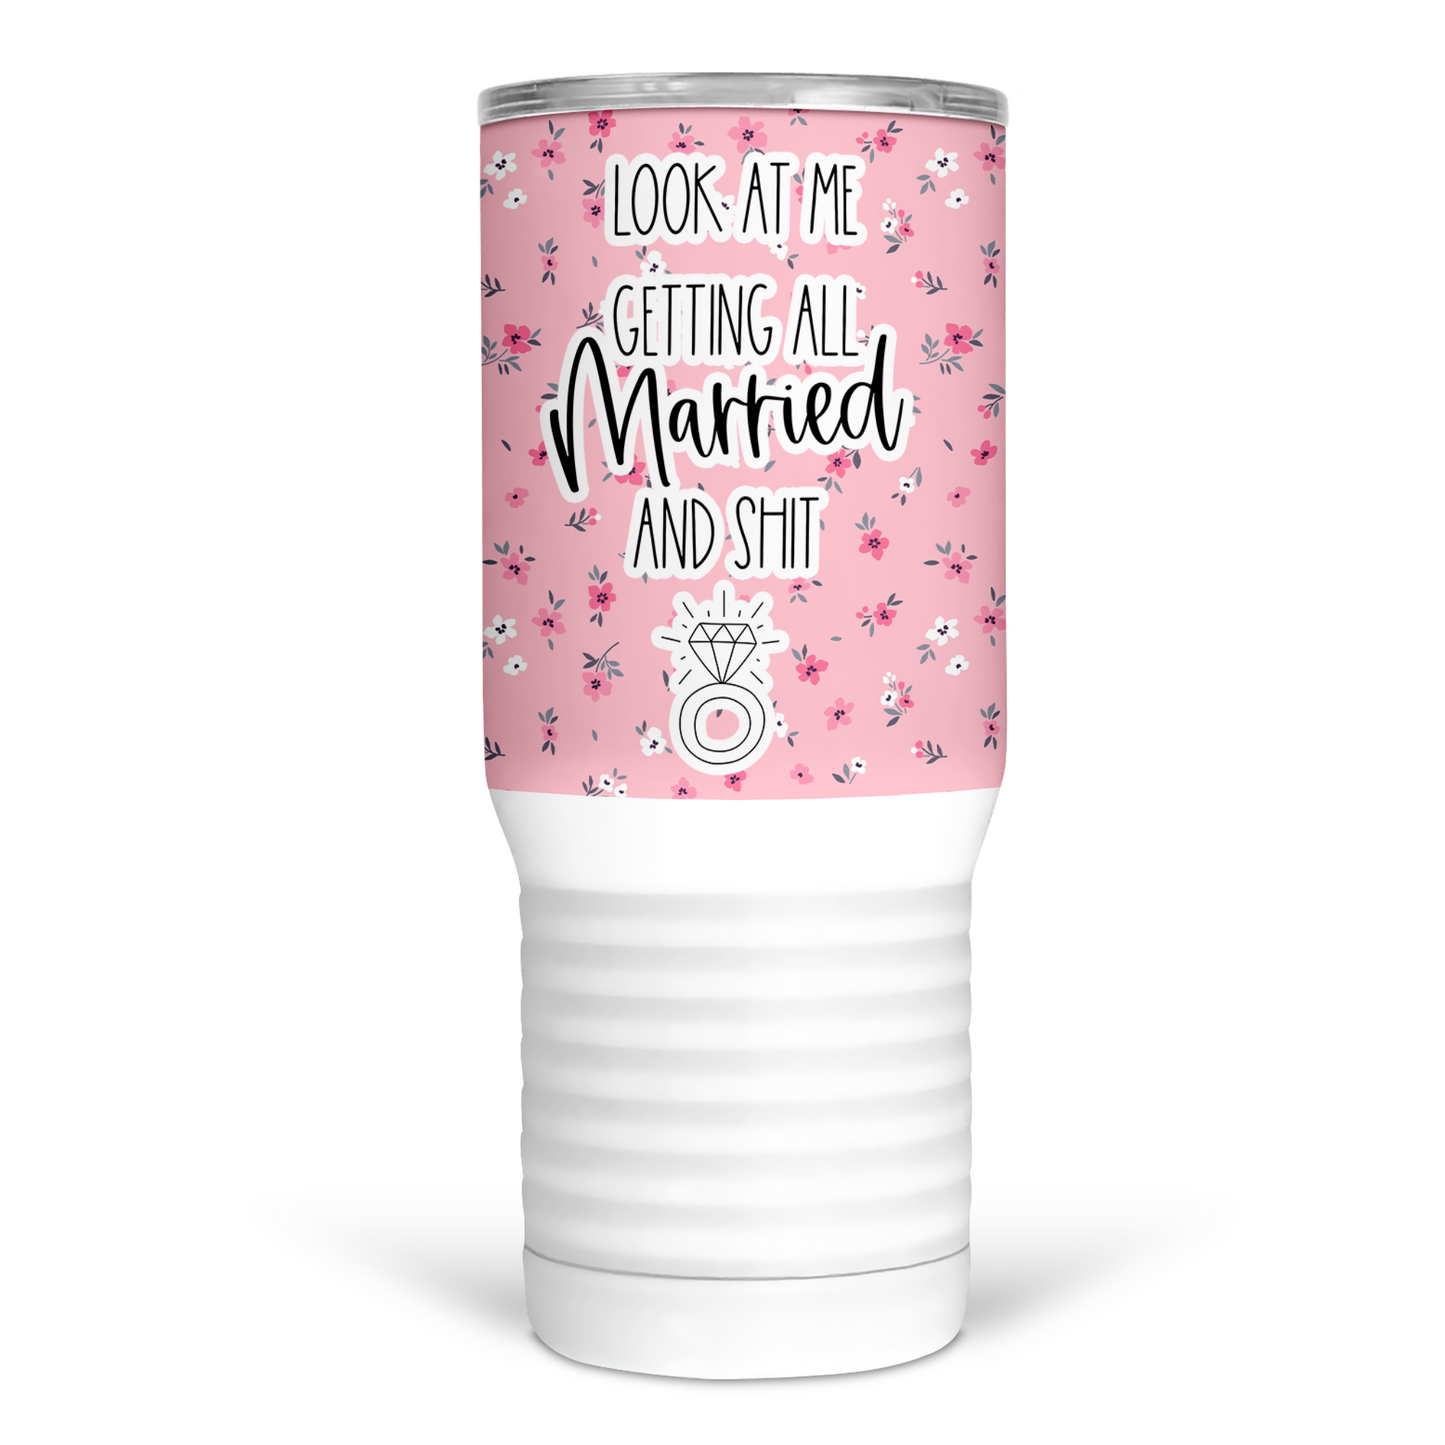 Look At Me Getting All Married and Shit  20 Oz Travel Tumbler